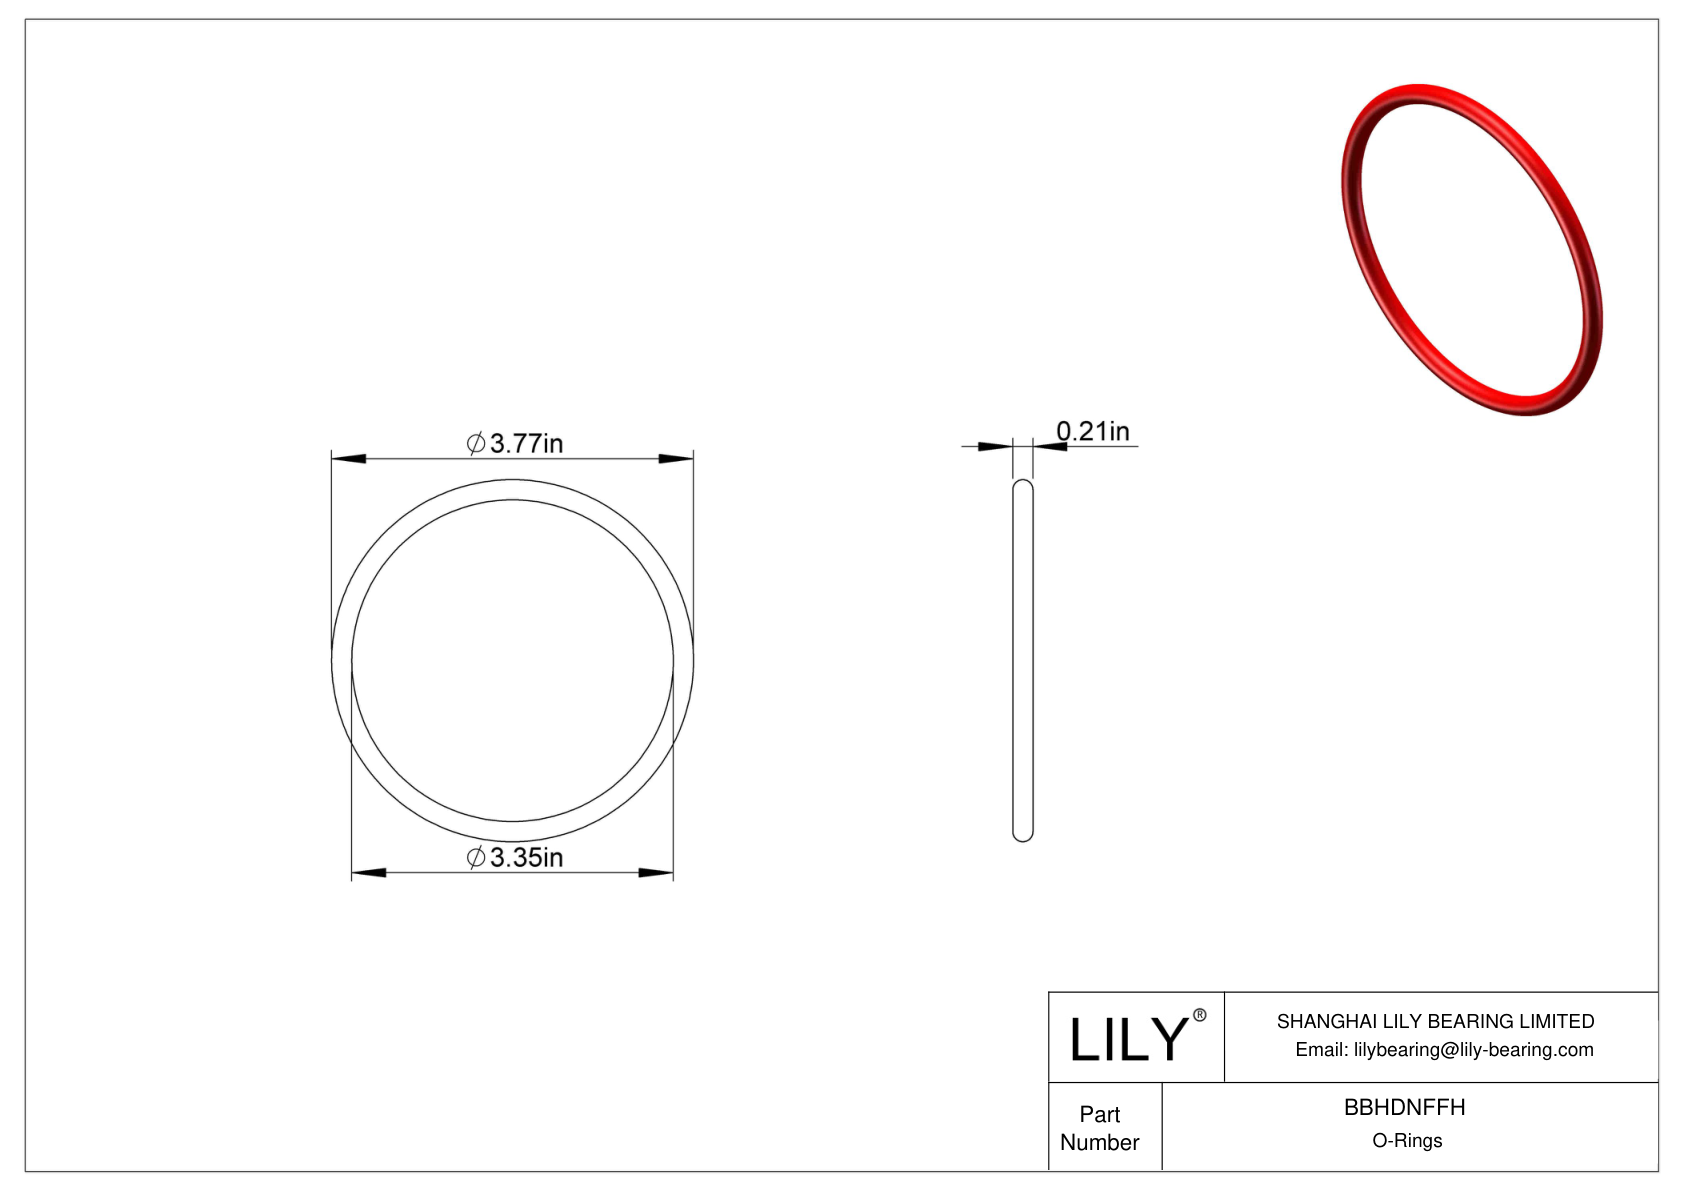 BBHDNFFH High Temperature O-Rings Round cad drawing